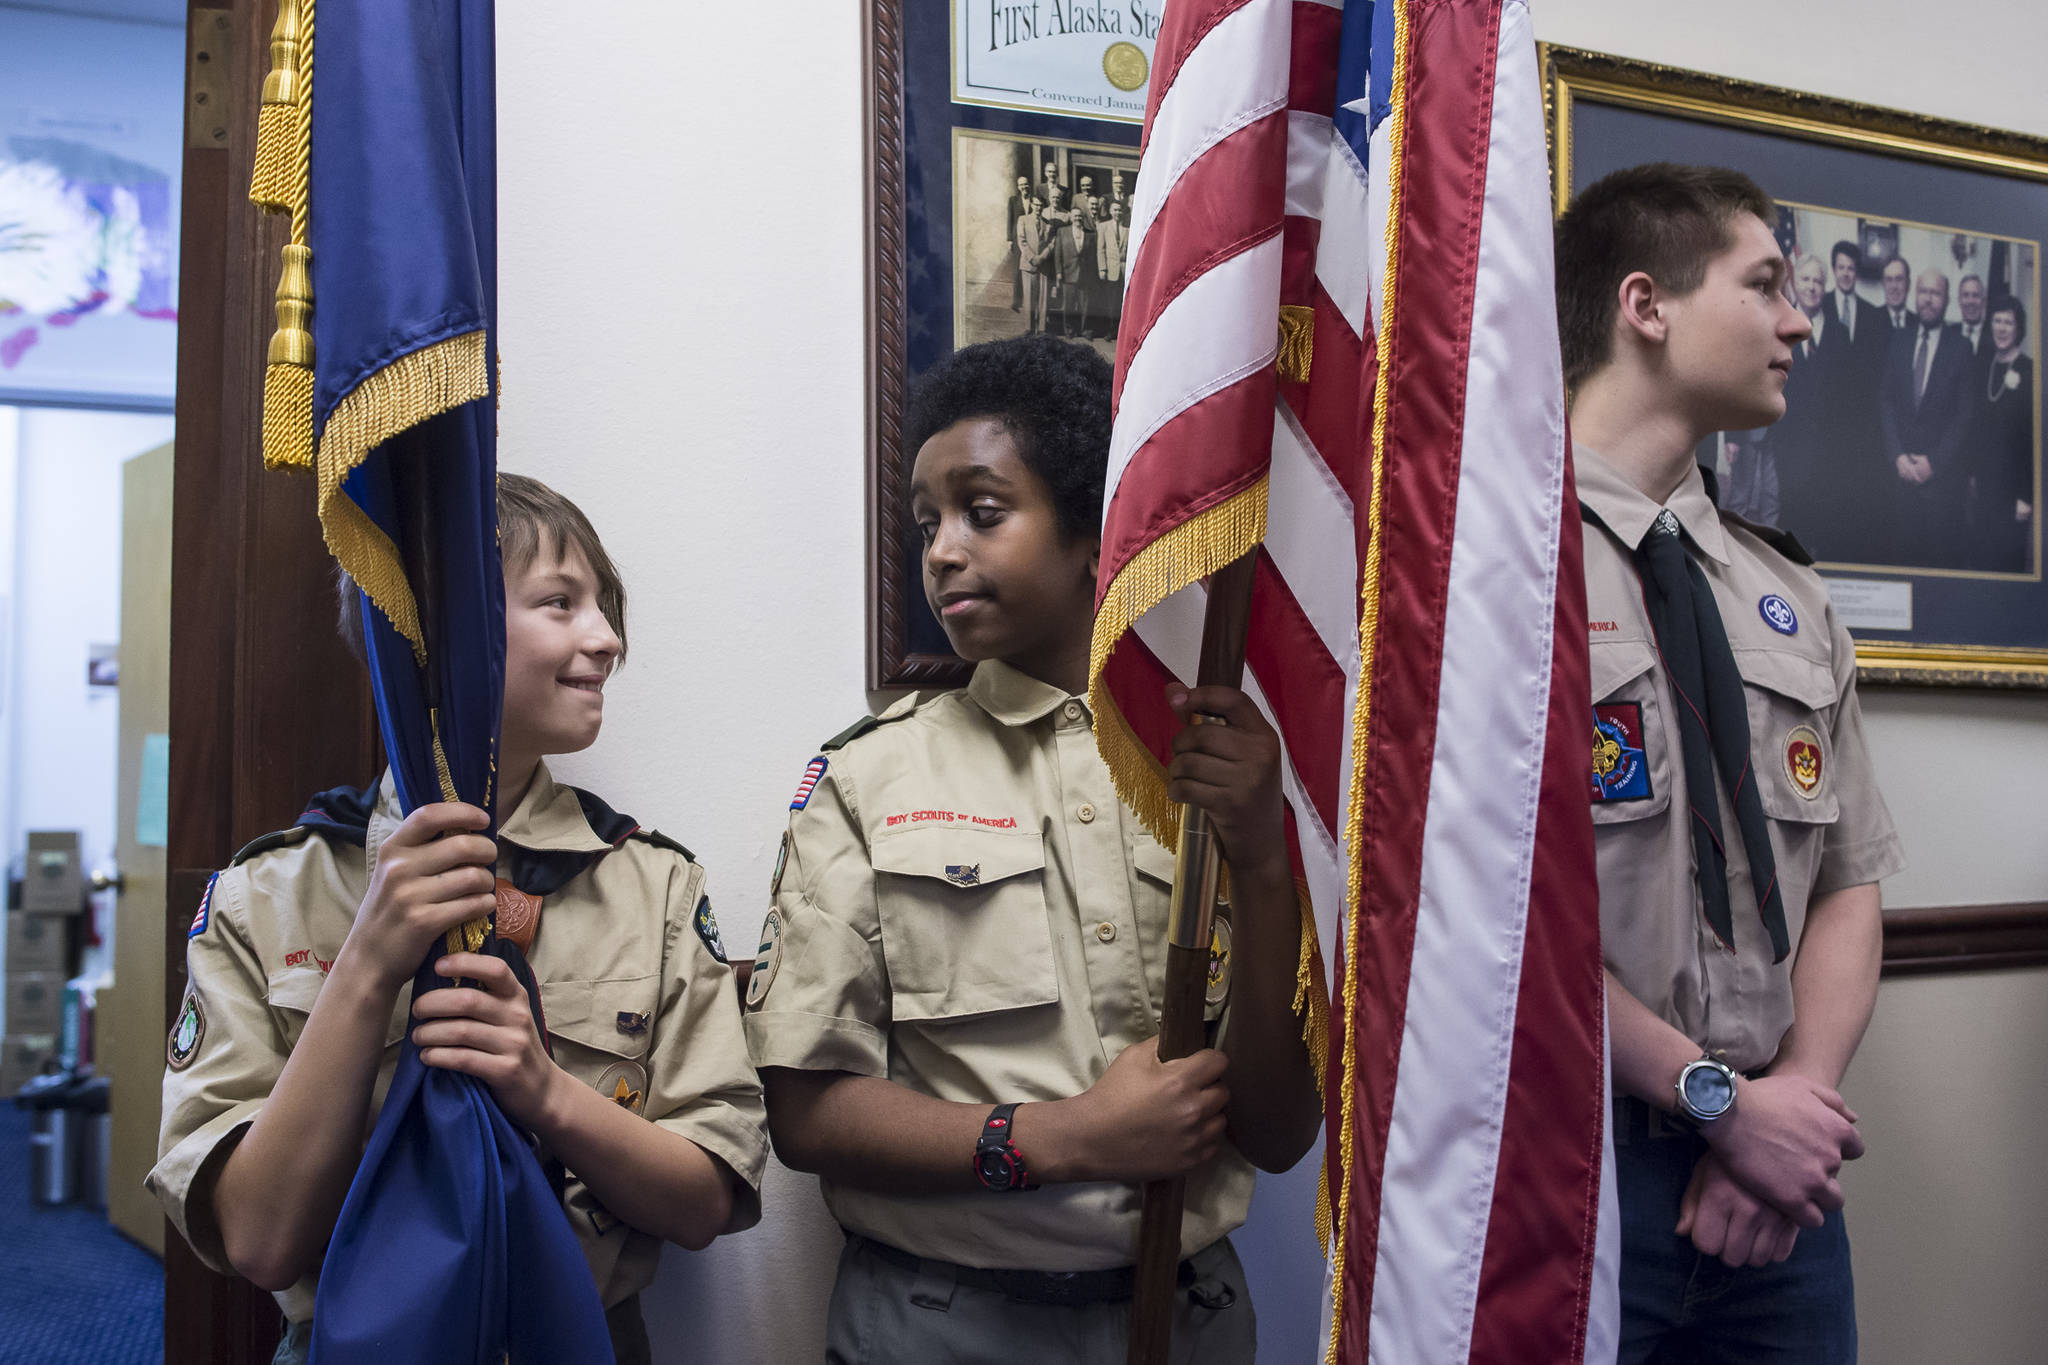 Boys Scouts wait to present the colors on the opening day of the 31st Session of the Alaska Legislature on Tuesday, Jan. 15, 2019. (Michael Penn | Juneau Empire)